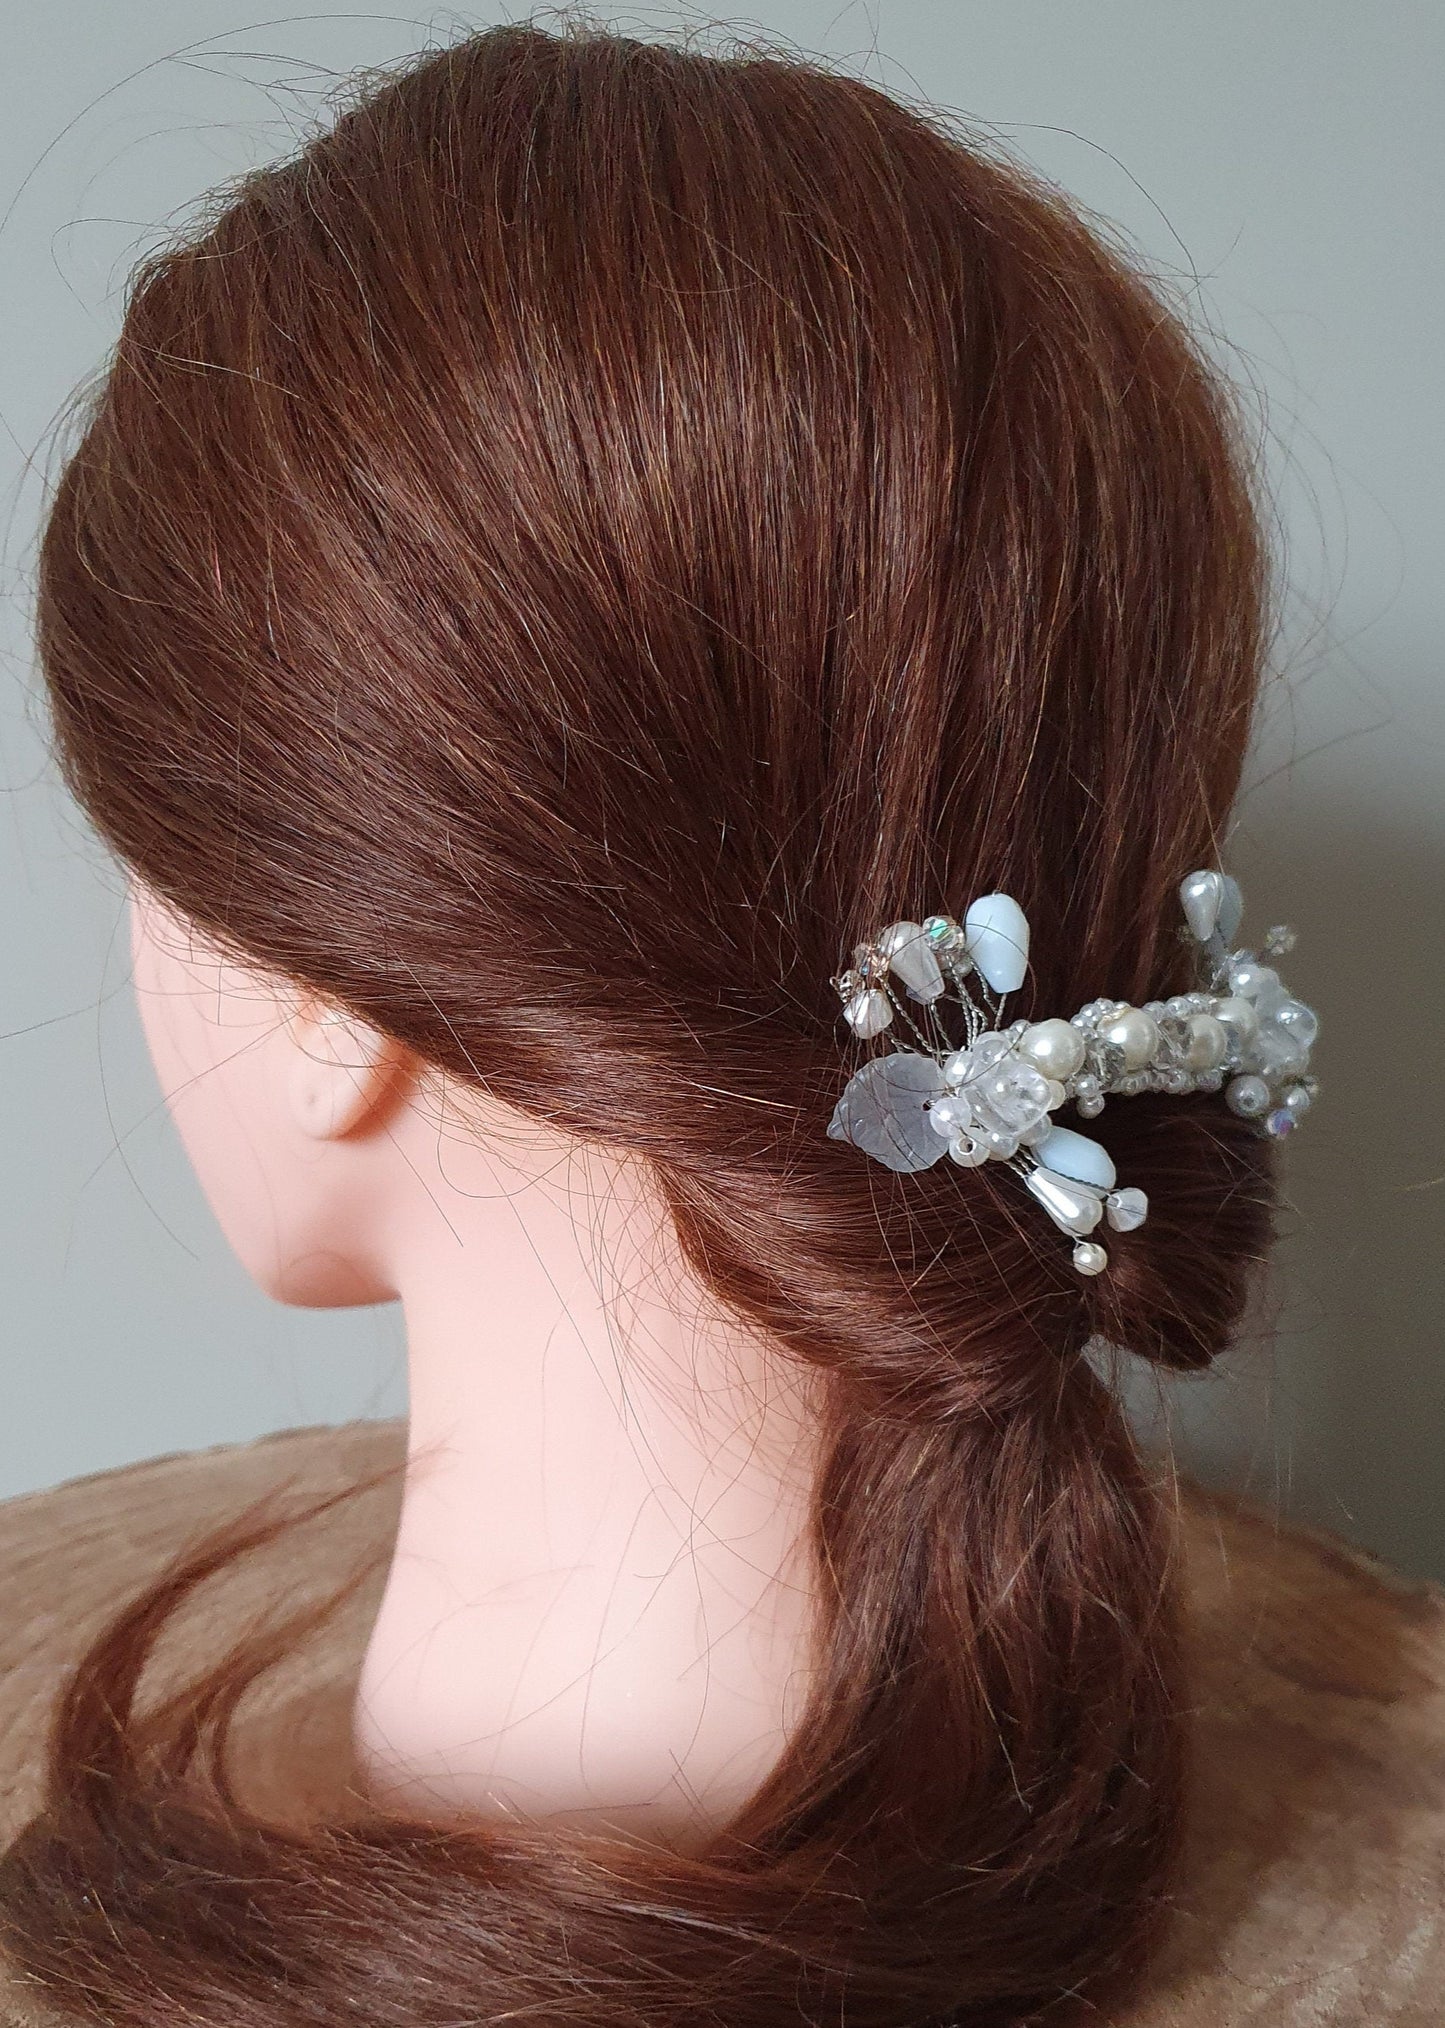 Handmade small hair clip for brides or guests - hair accessories, silver pearls hair clip, special occasion